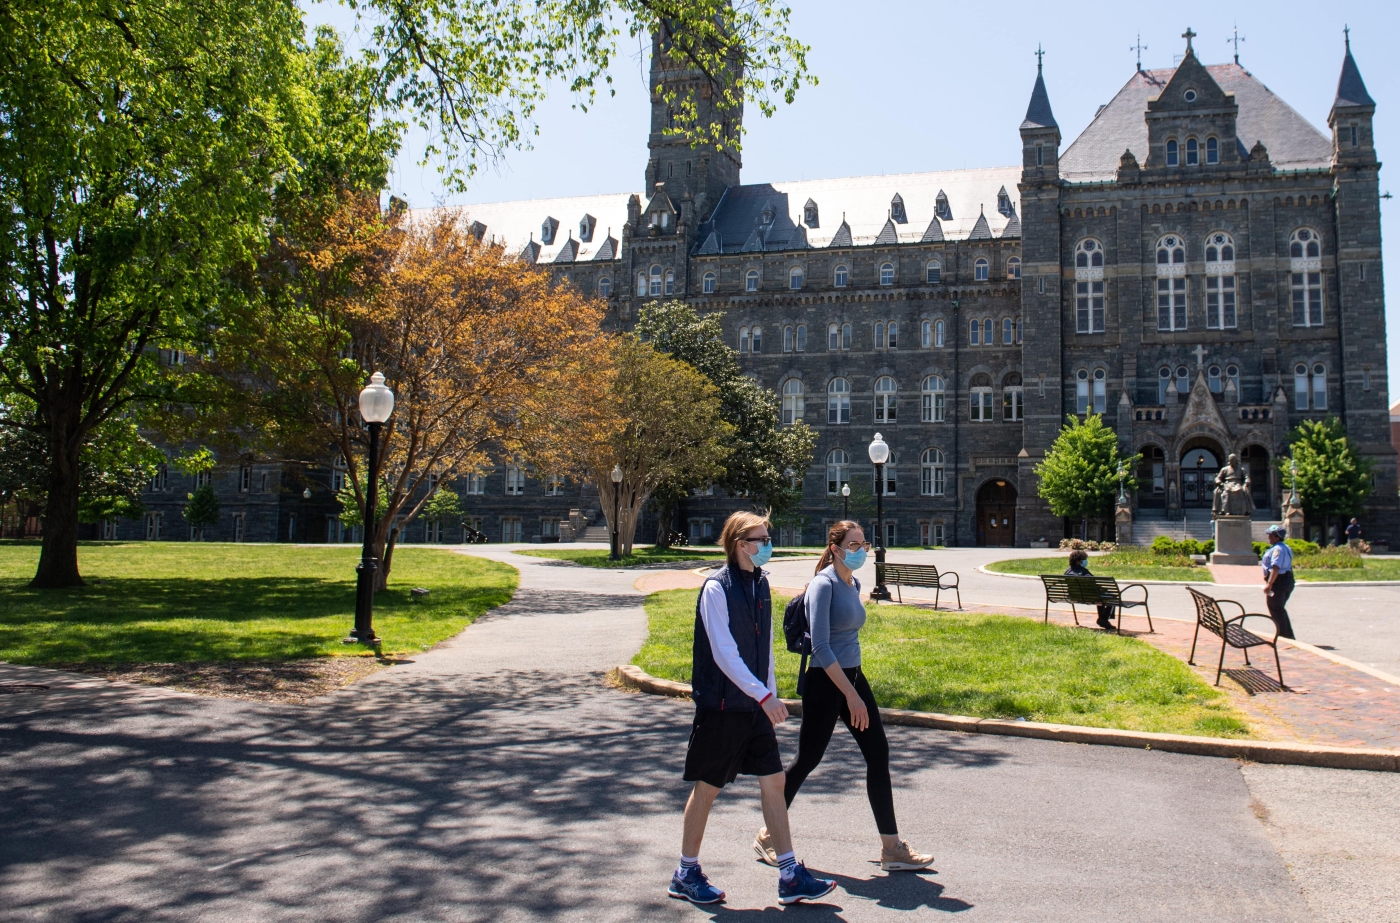 Georgetown University is nearly empty after classes were canceled due to the coronavirus pandemic